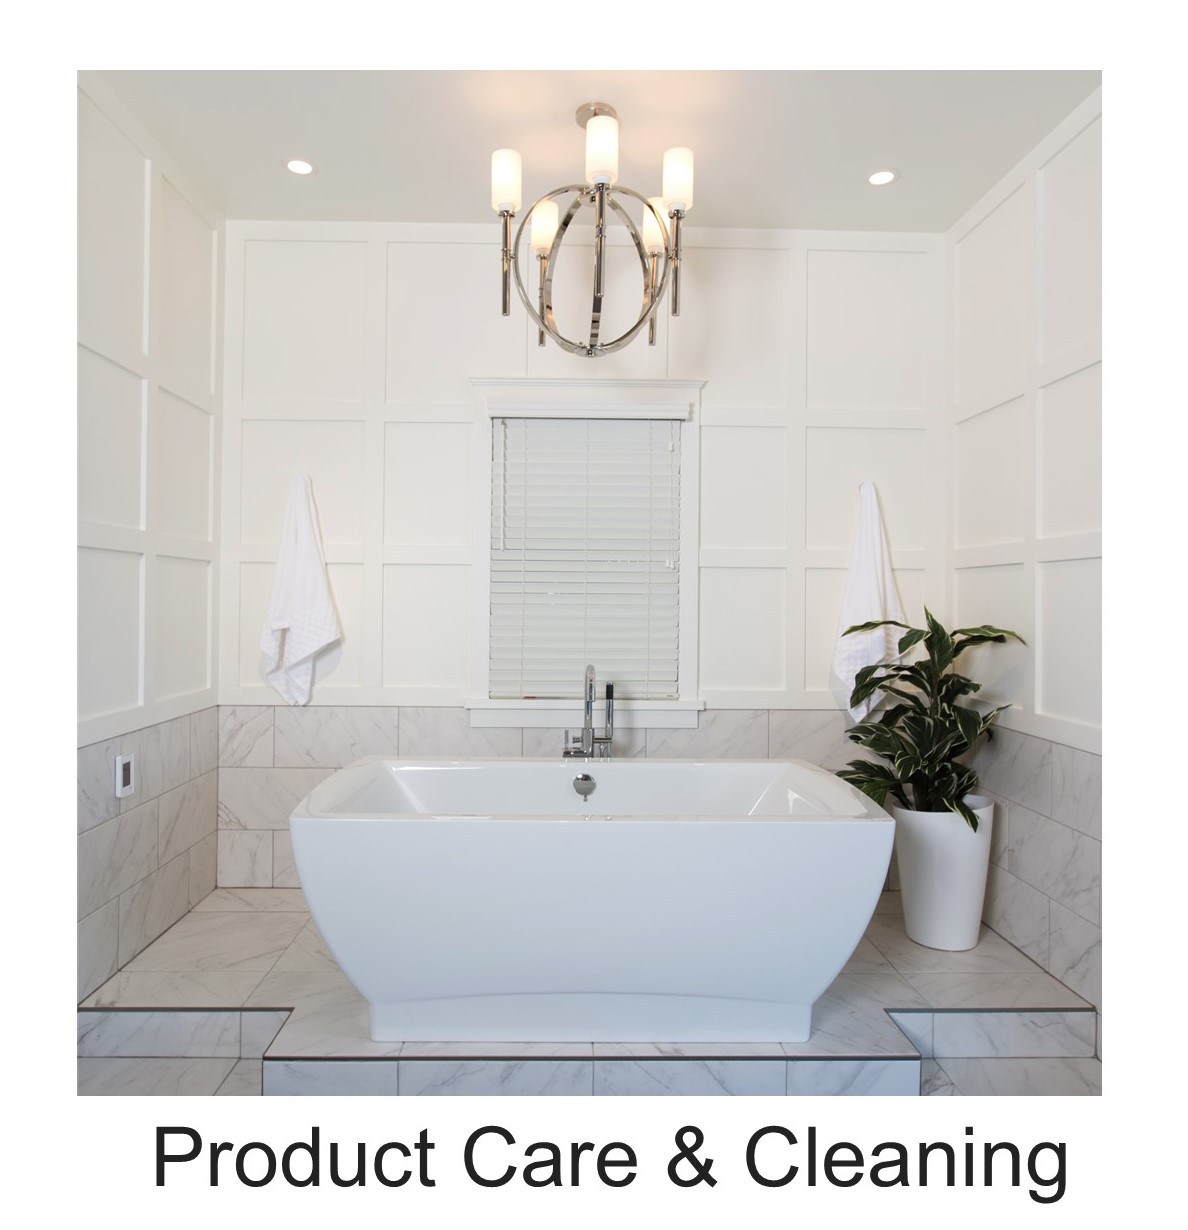 Product care and cleaning